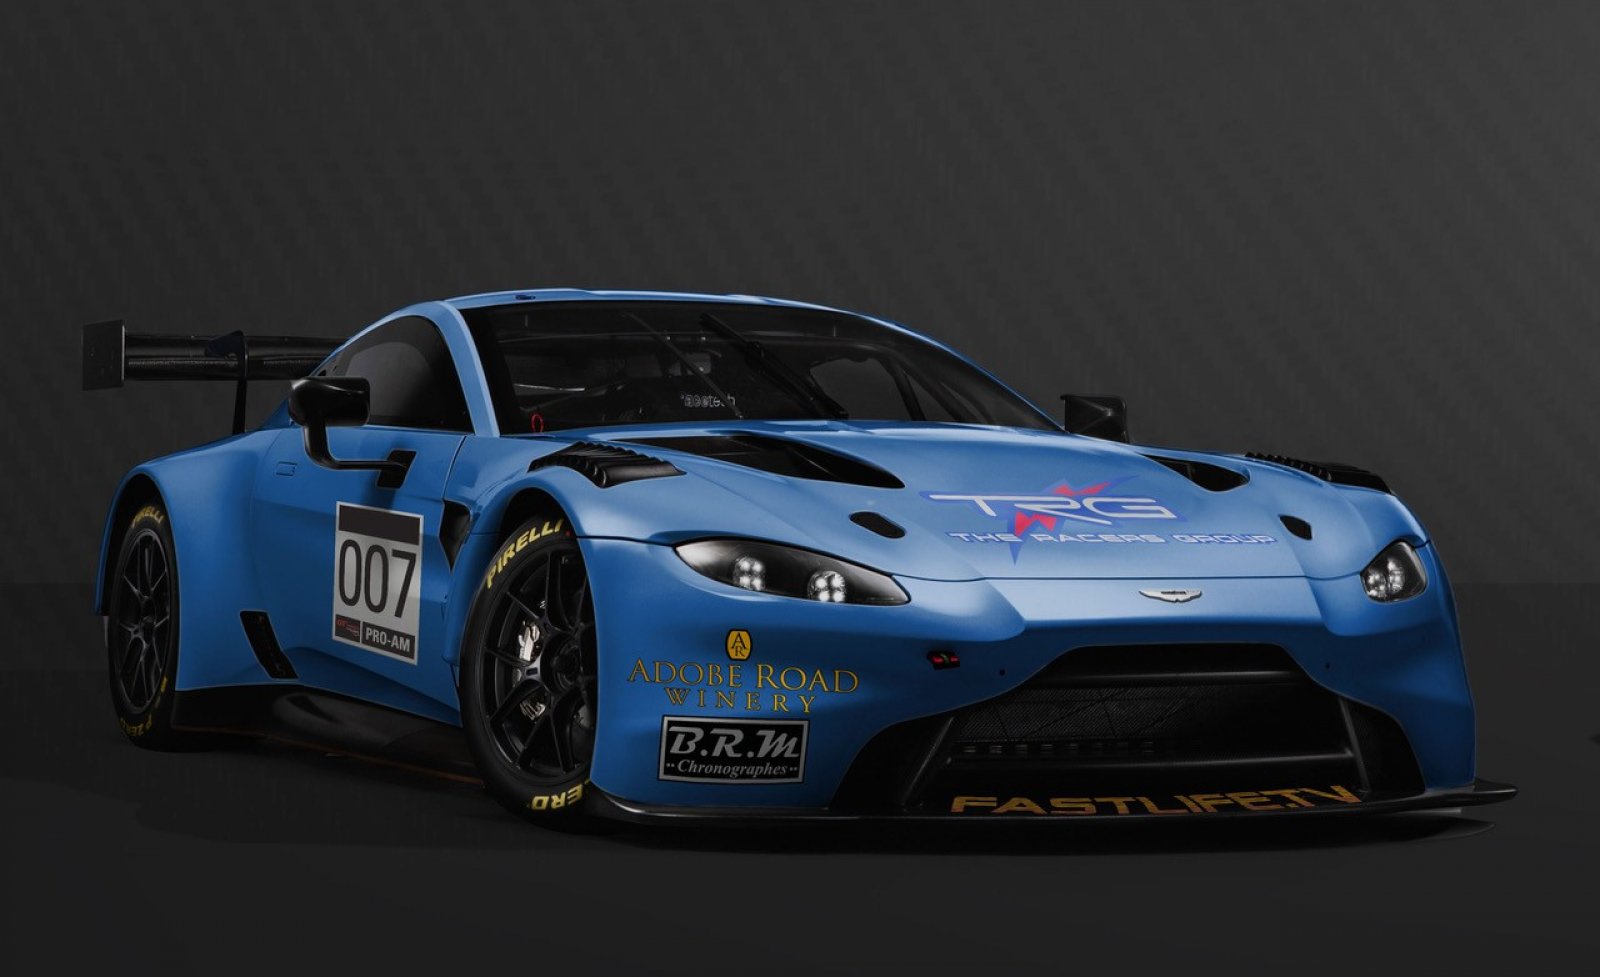 THE RACERS GROUP TO COMPETE IN GT3 RACING IN SRO’S FANATEC GT WORLD CHALLENGE AMERICA